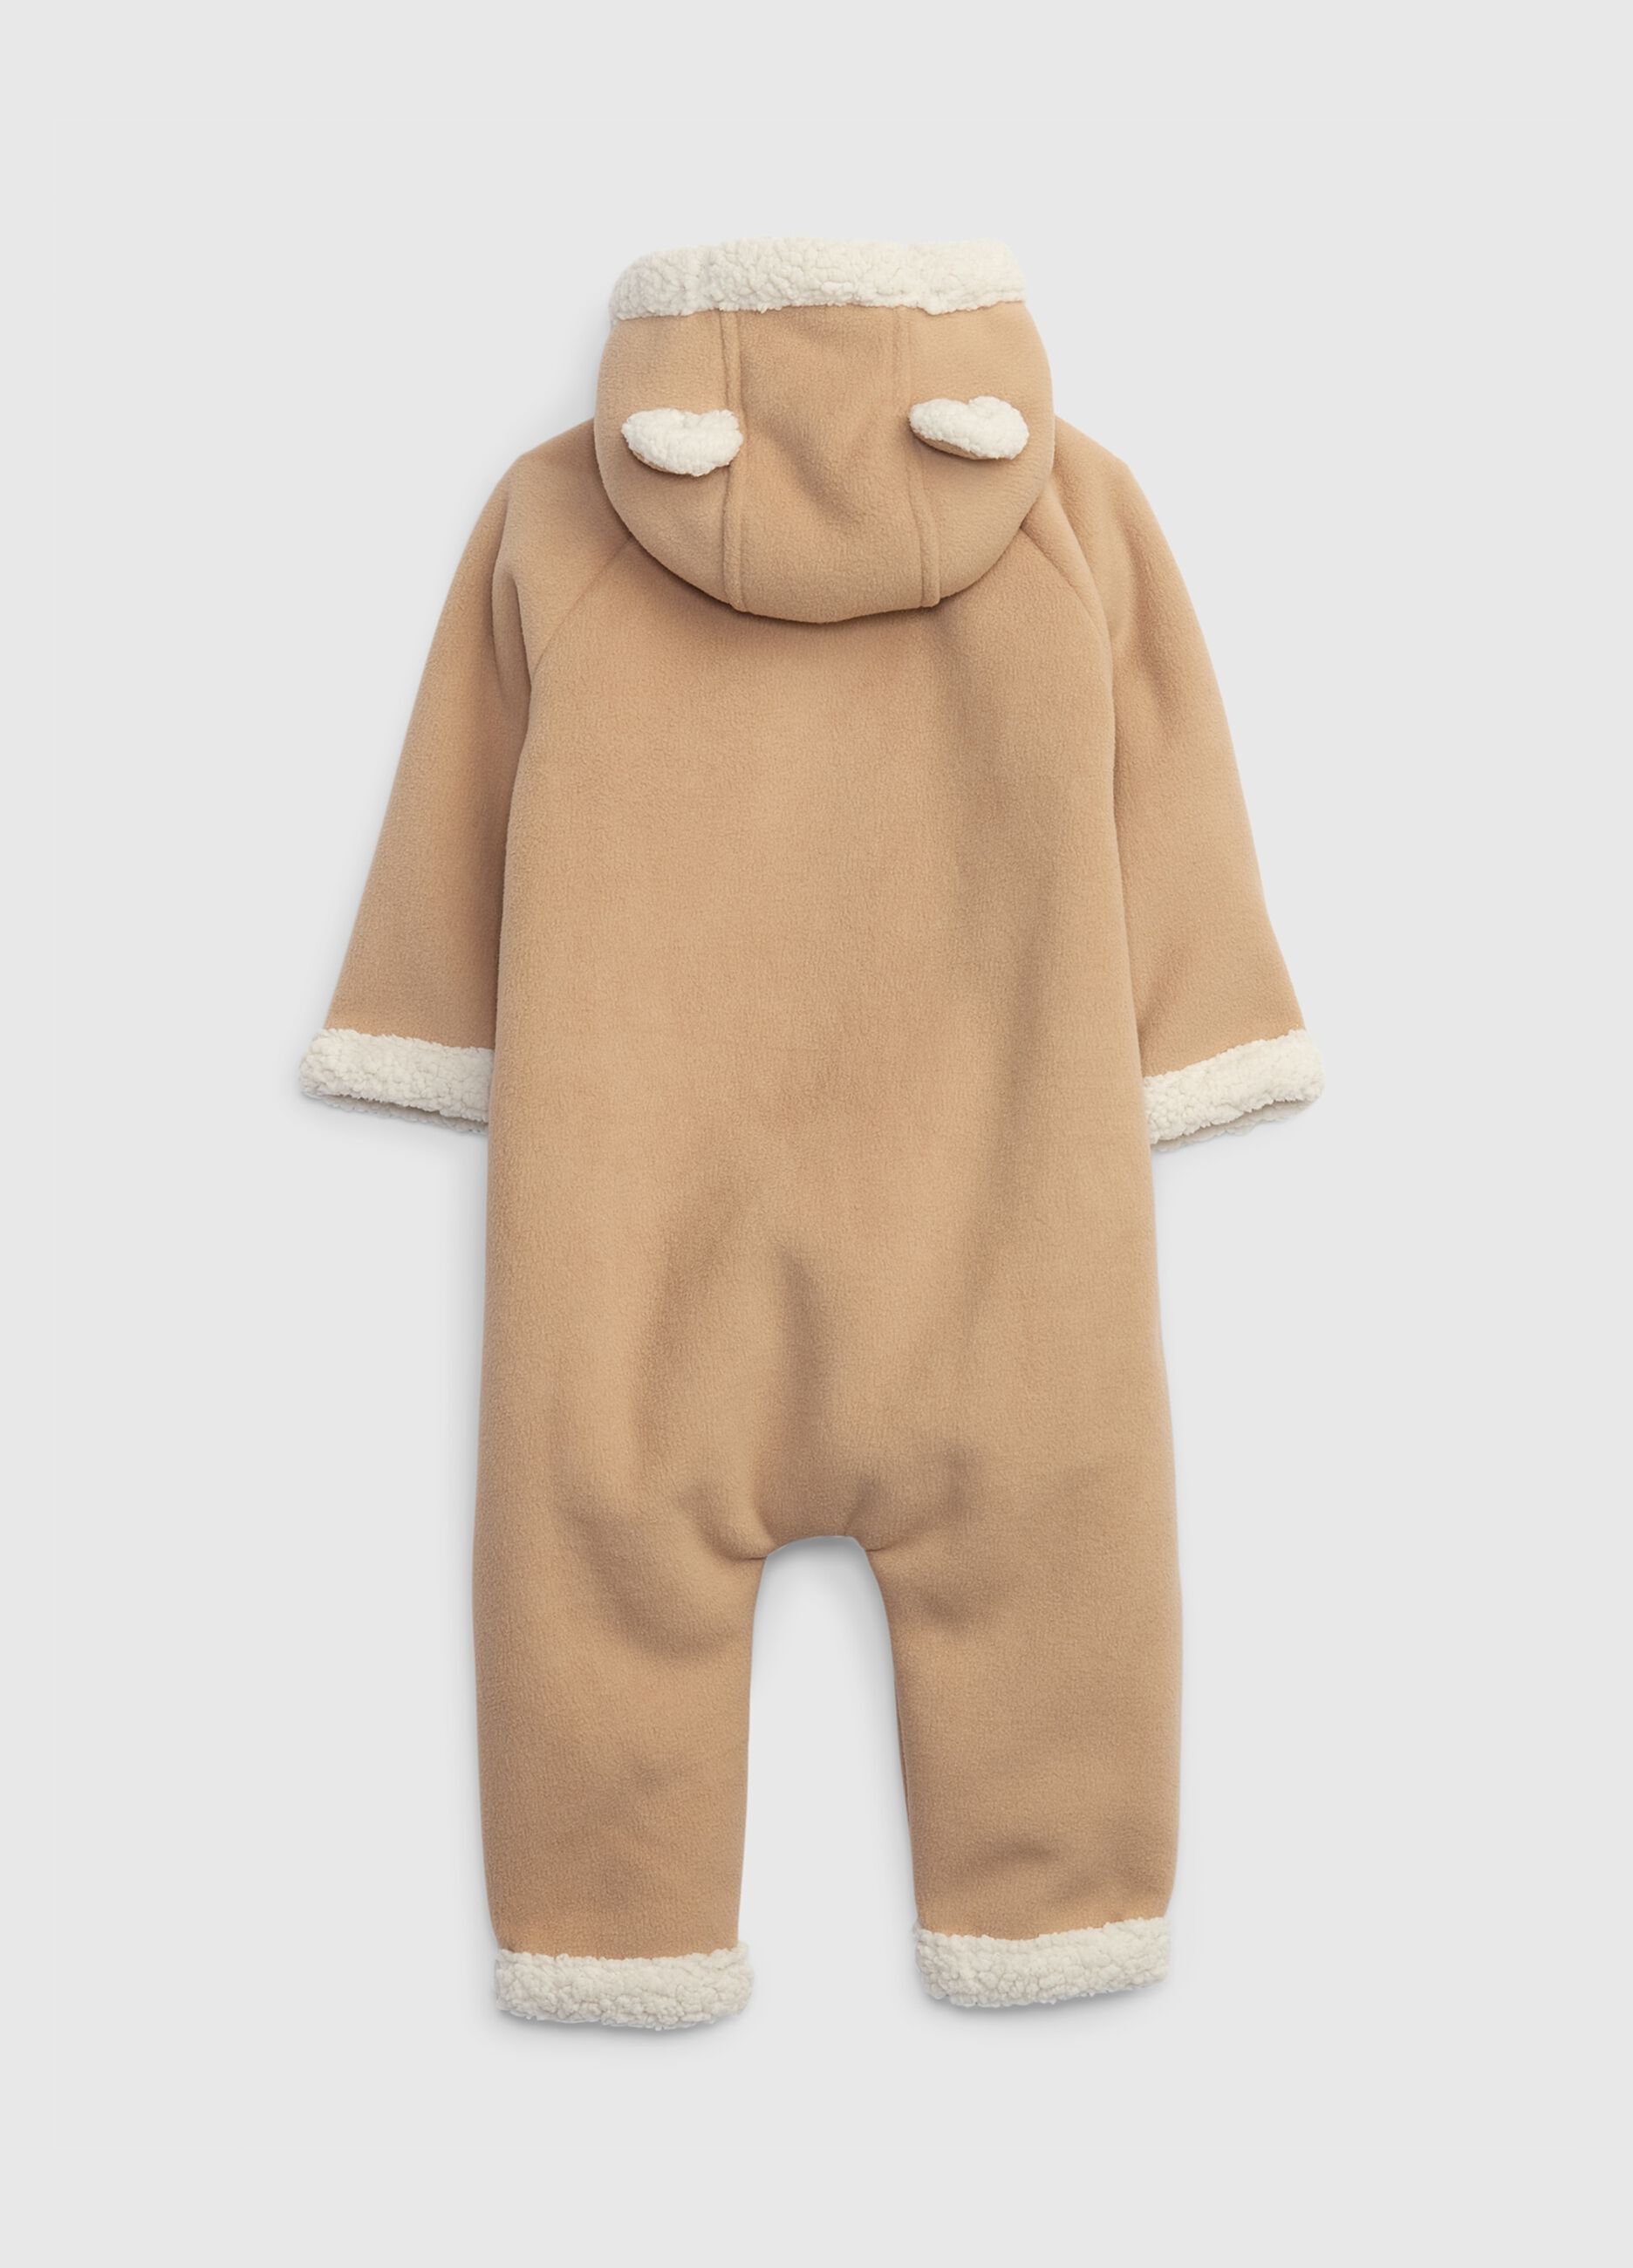 Onesie with sherpa lining